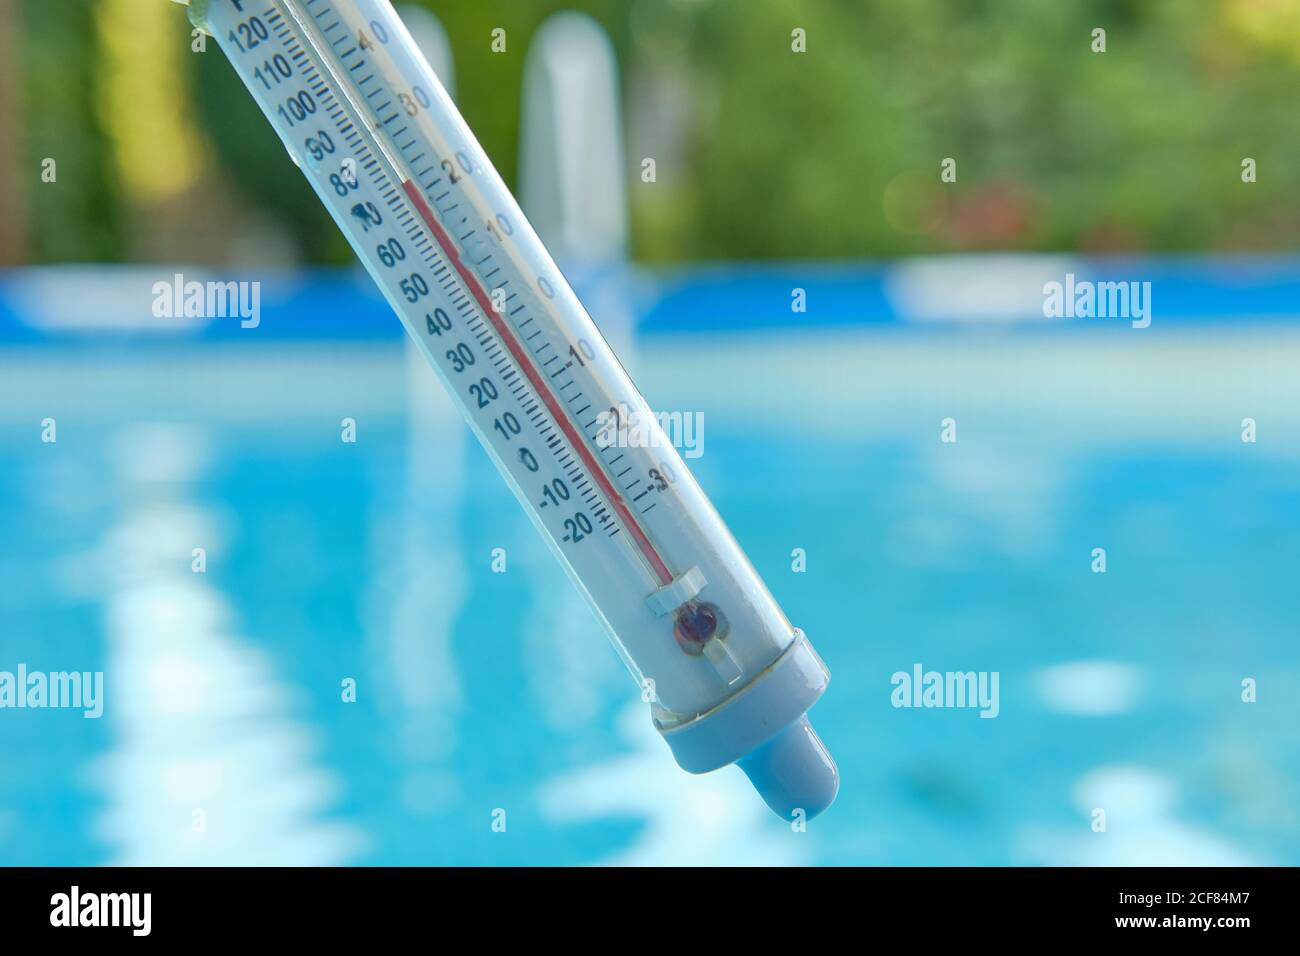 https://c8.alamy.com/comp/2CF84M7/thermometer-measuring-water-temperature-for-swimming-on-a-blurred-background-of-blue-water-in-the-pool-summer-concept-2CF84M7.jpg